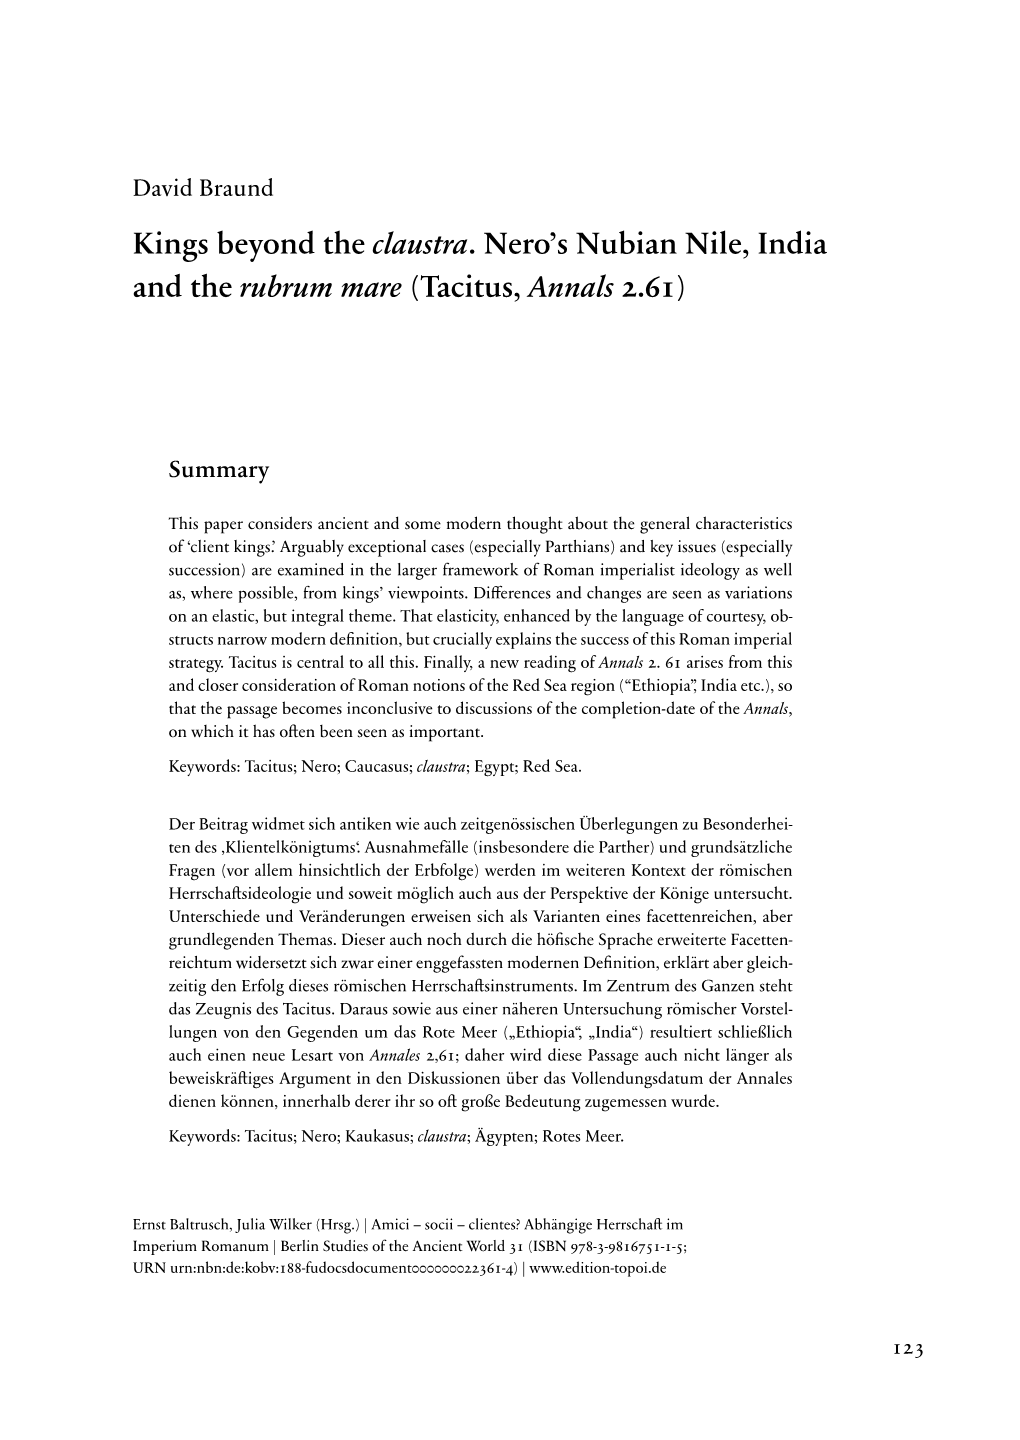 Kings Beyond the Claustra. Nero's Nubian Nile, India and the Rubrum